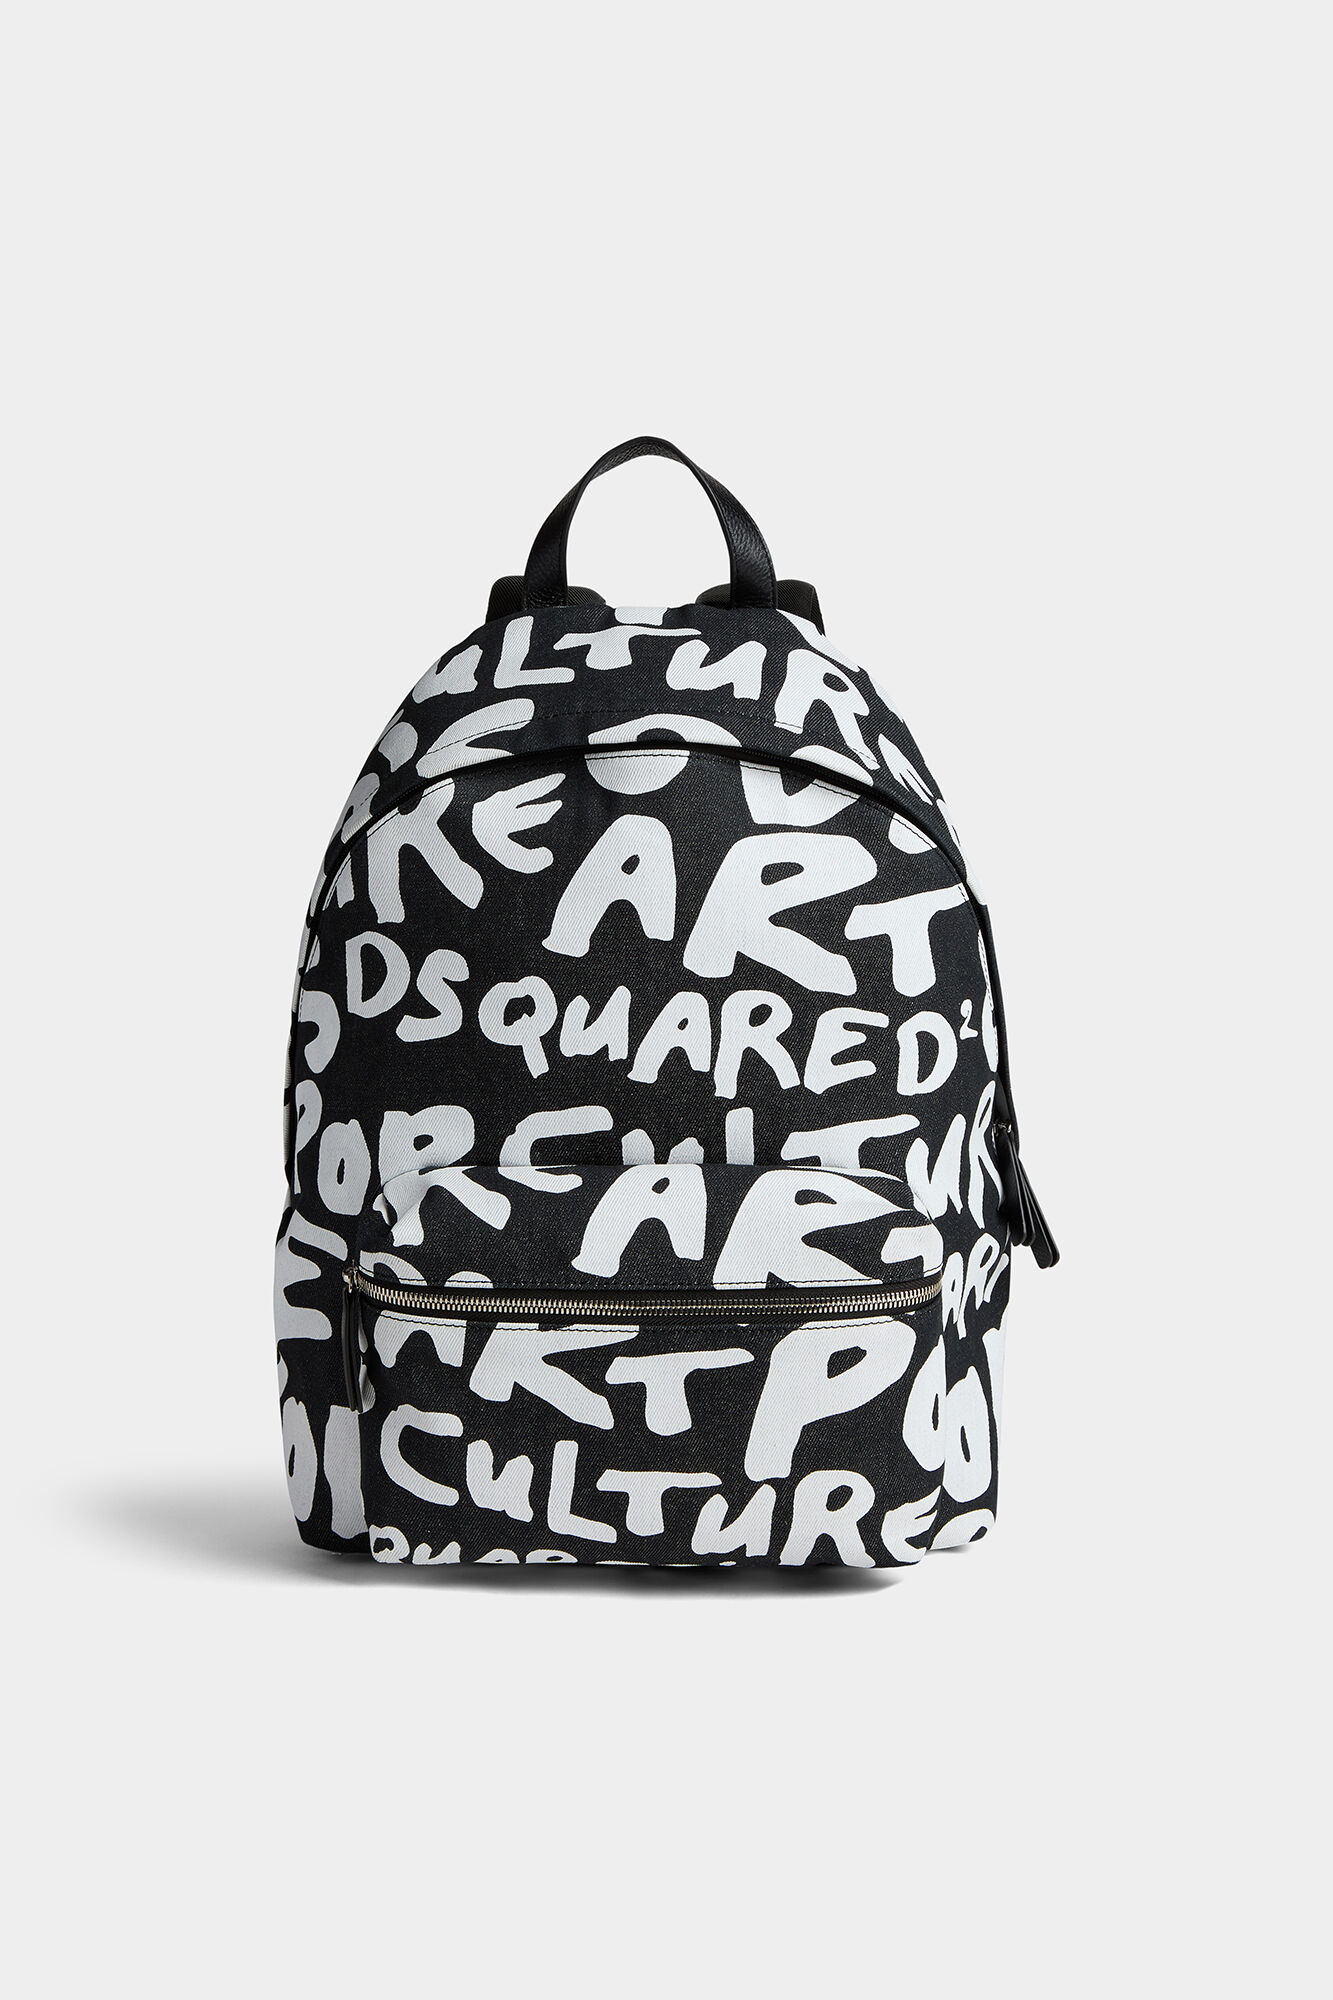 DSQUARED2 Women's Backpacks | ShopStyle